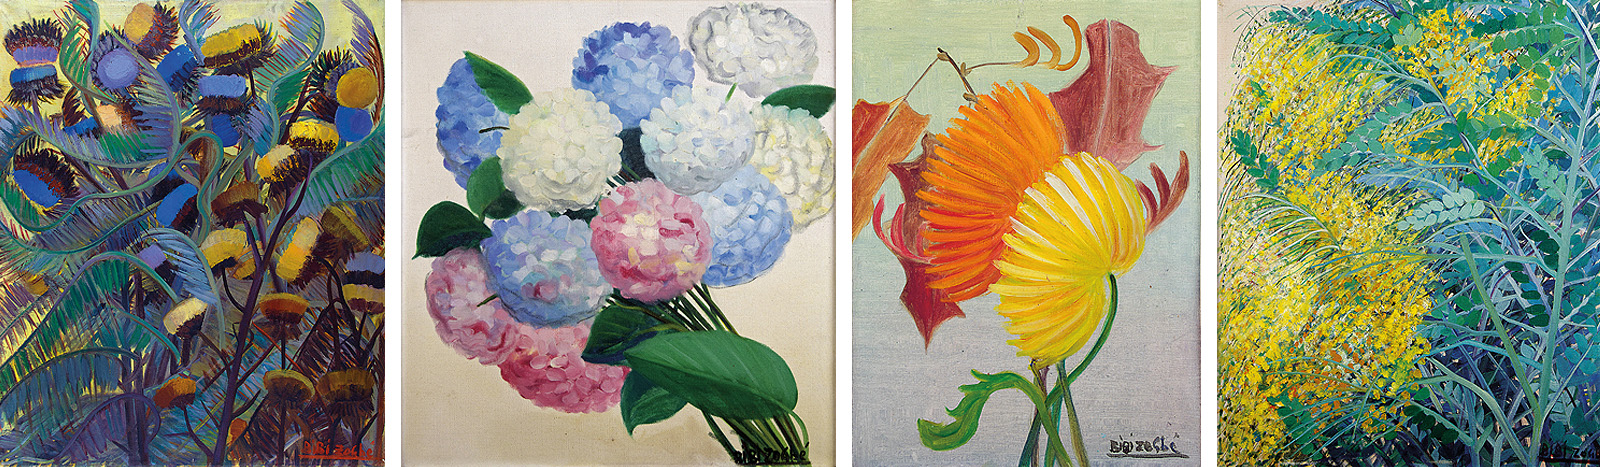 <b>from left</b> Untitled and undated, oil on canvas; “Hydrangeas,” 1942, oil on canvas, 65 x 60 centimeters; “Chrysanthemums,” 1975, oil on canvas, 40 x 30 centimeters; “Japanese Apple Tree,” undated, oil on hardboard, 70 x 60 centimeters.